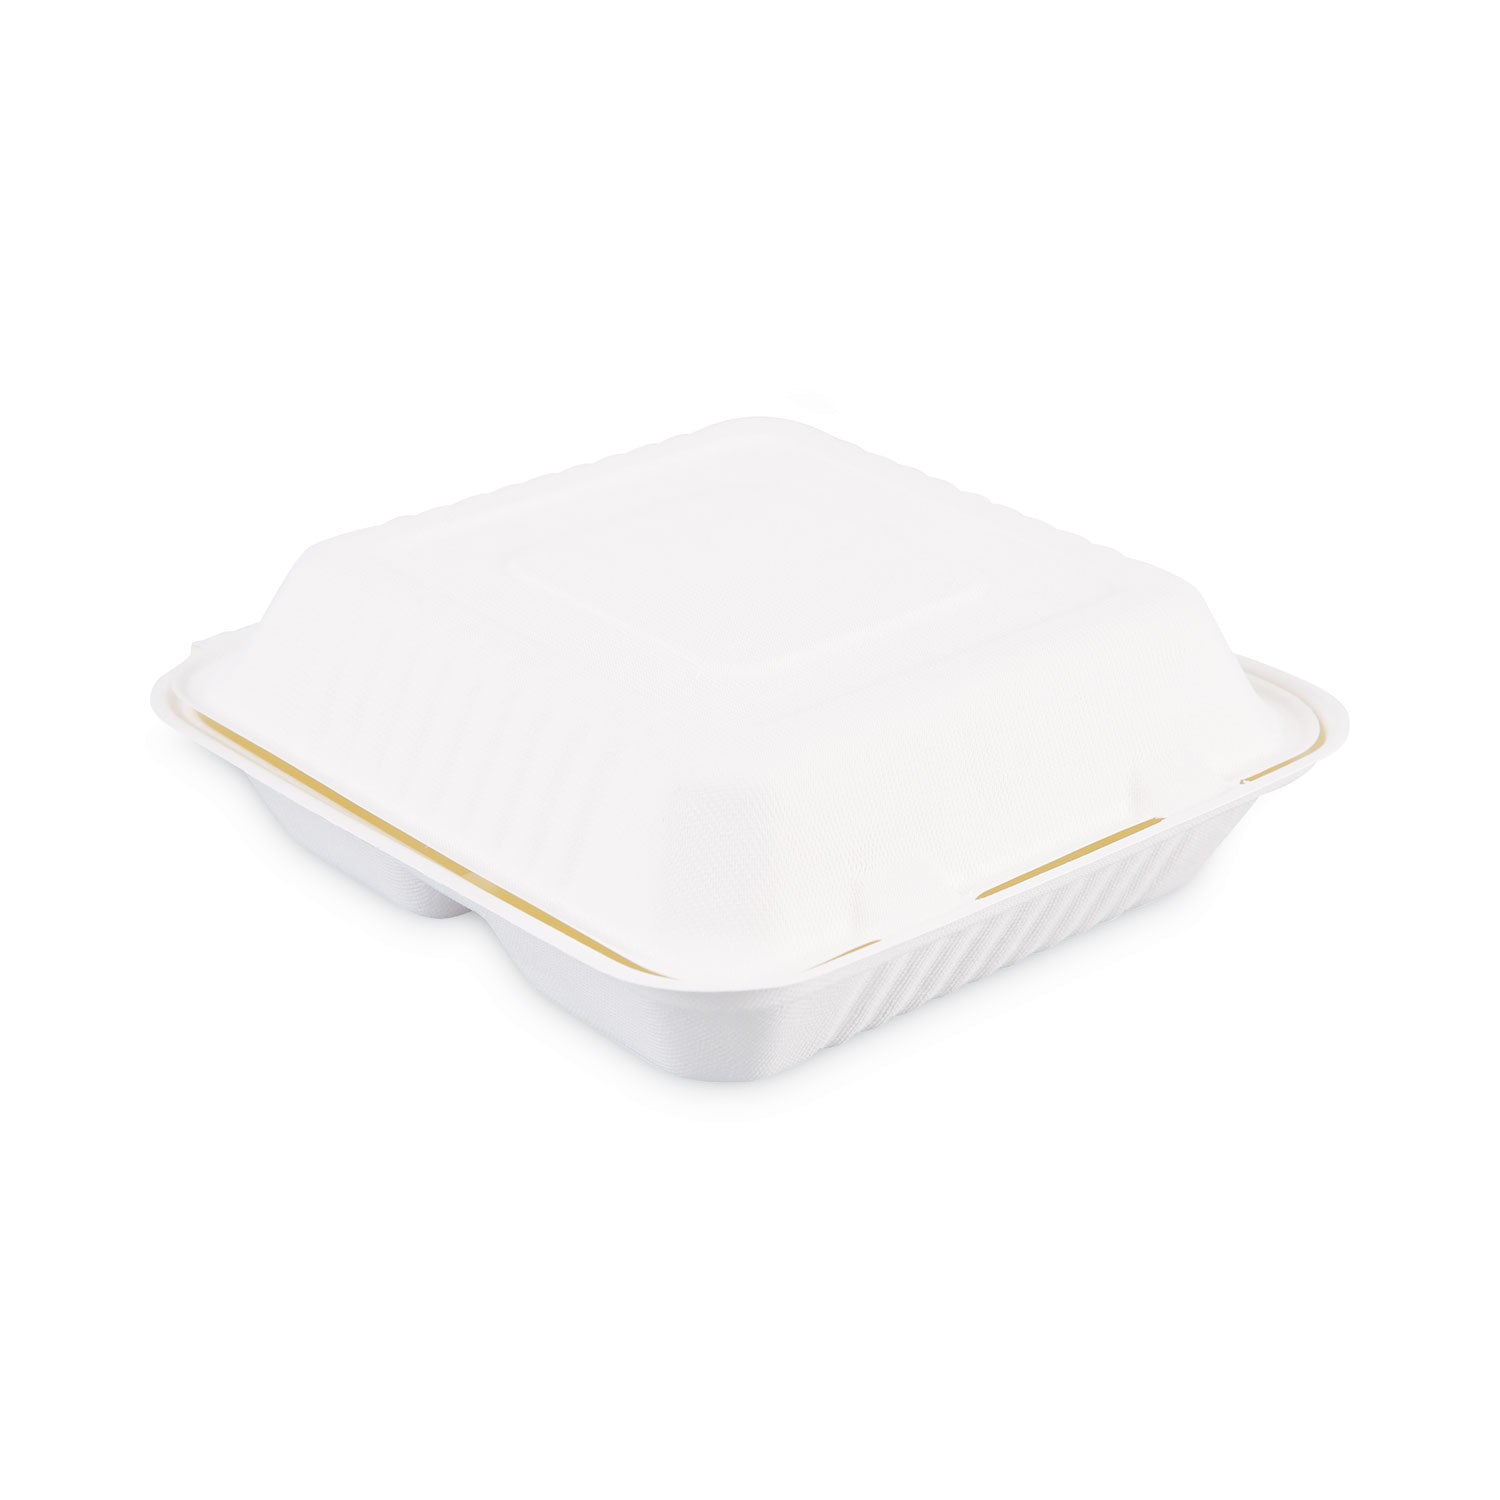 bagasse-food-containers-hinged-lid-3-compartment-9-x-9-x-319-white-sugarcane-100-sleeve-2-sleeves-carton_bwkhingewf3cm9 - 2